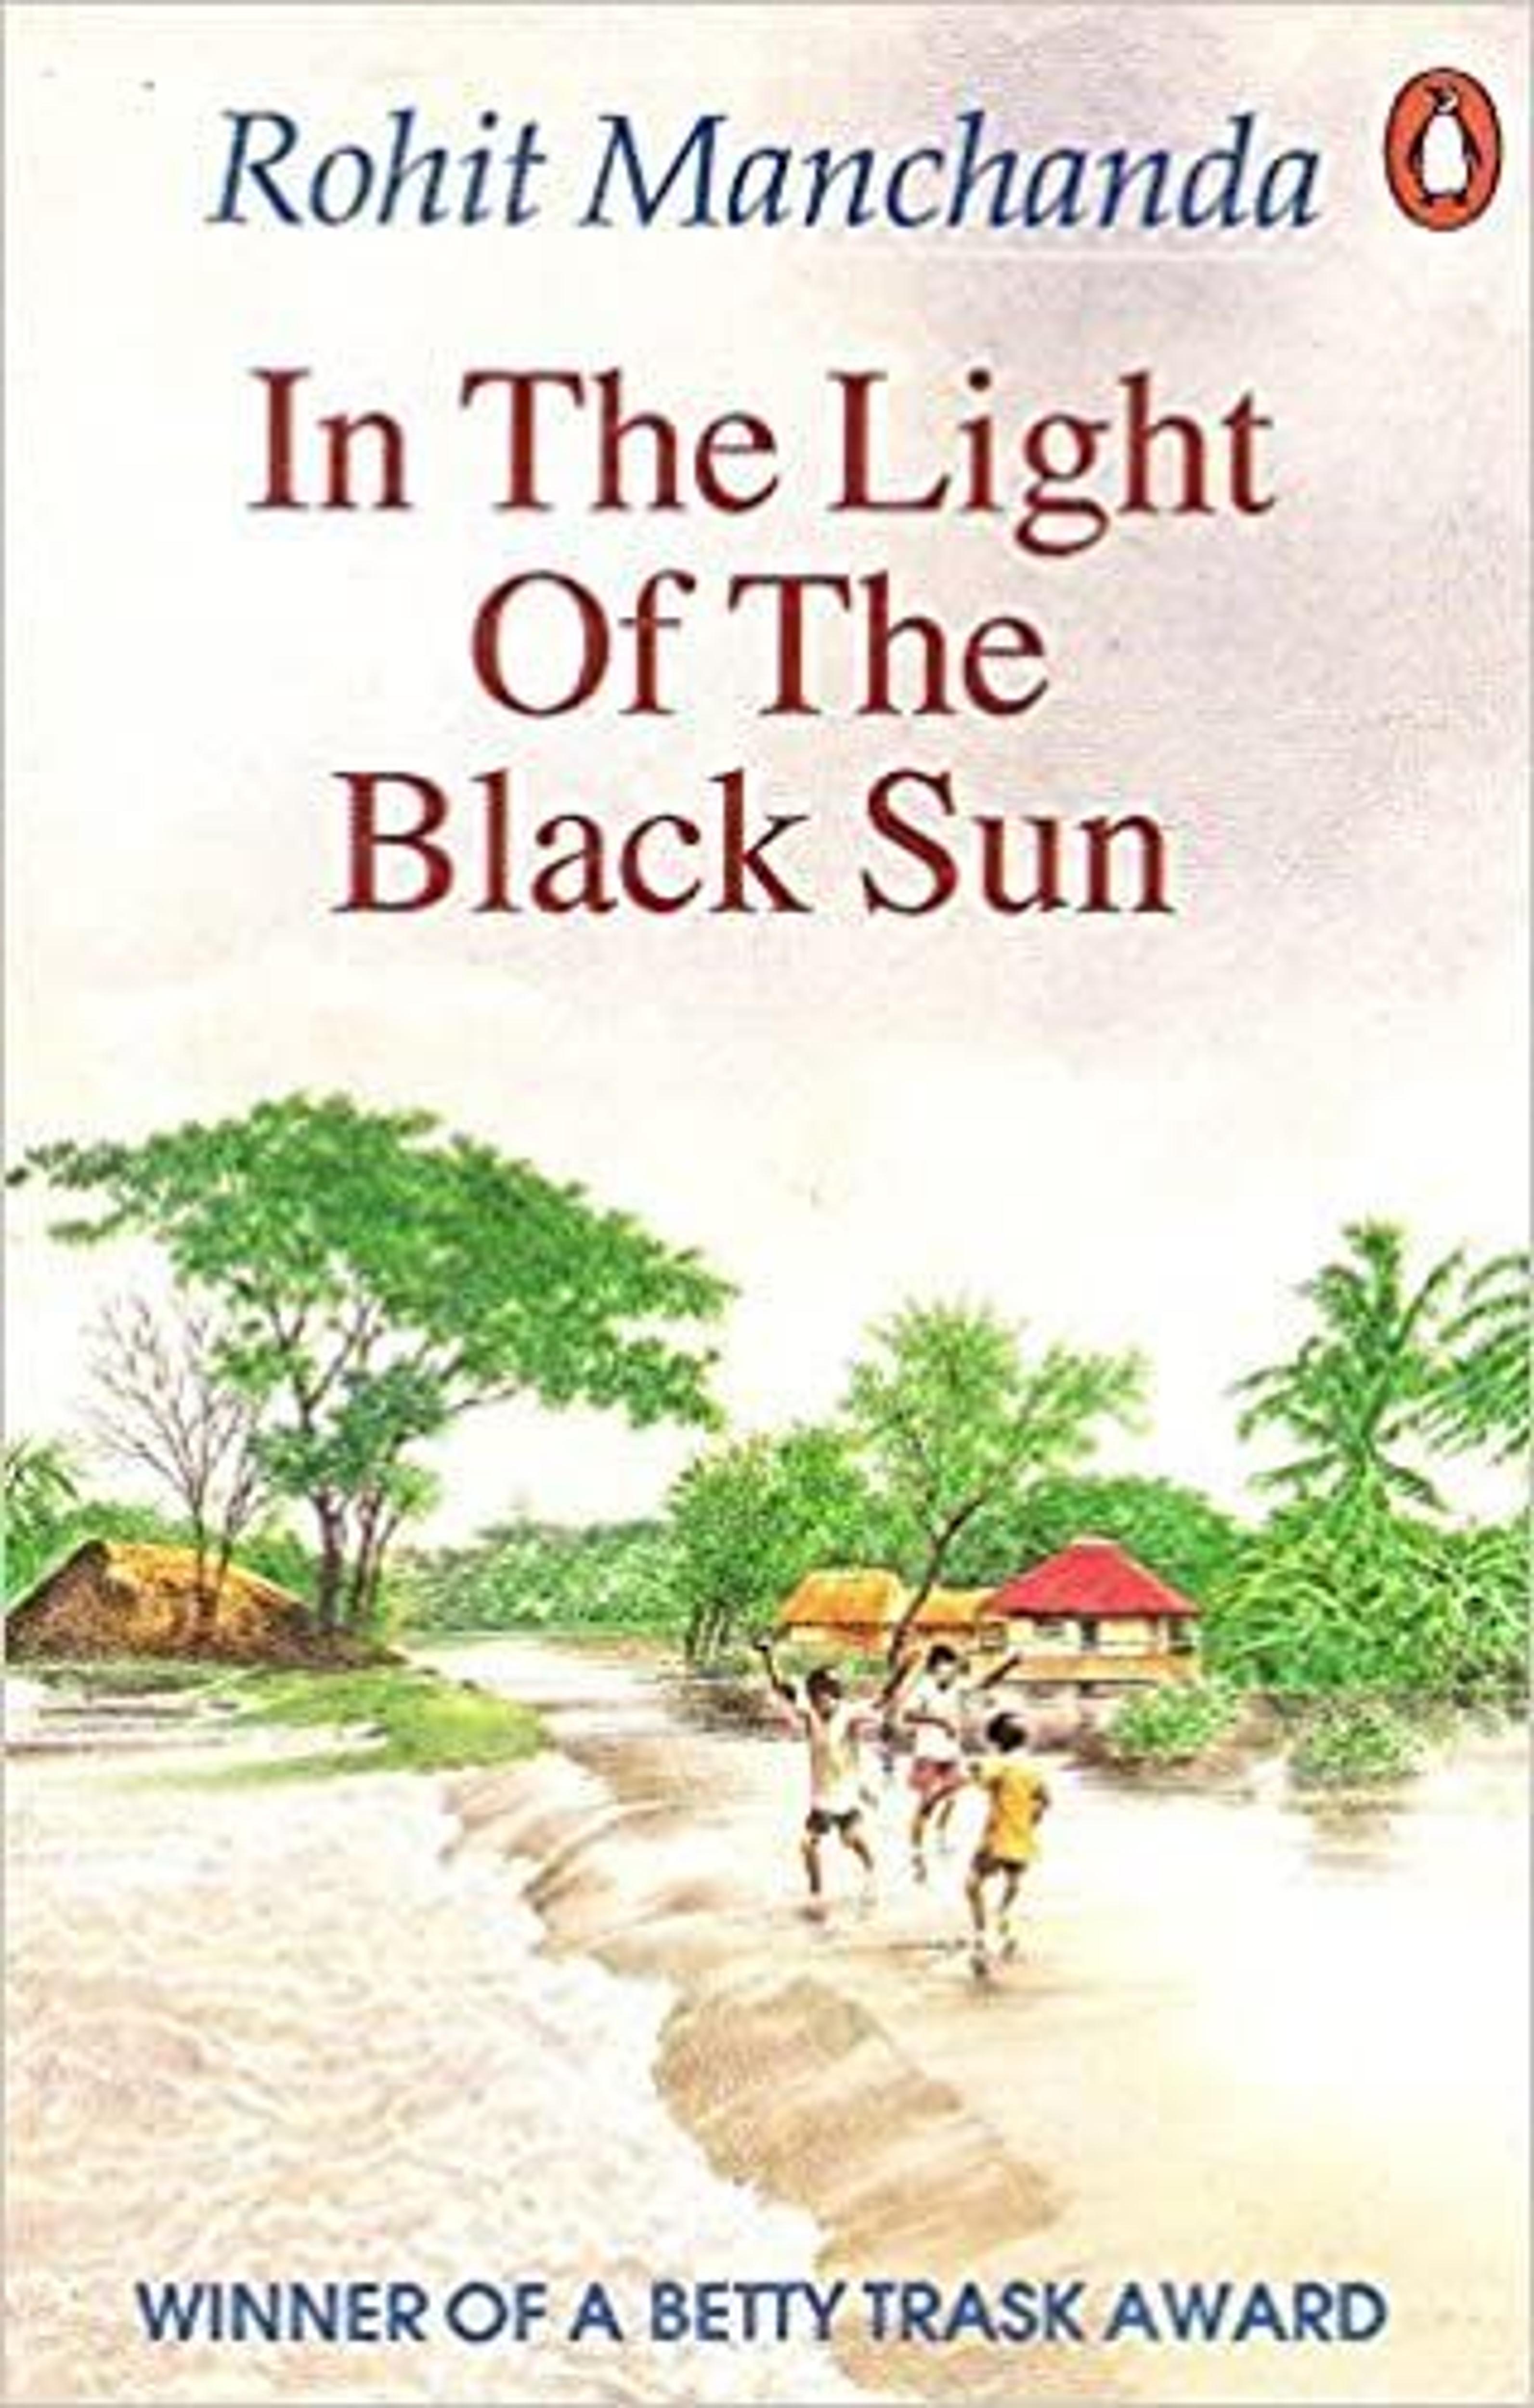 Another Look at India’s Books: Rohit Manchanda’s “In the Light of the Black Sun”